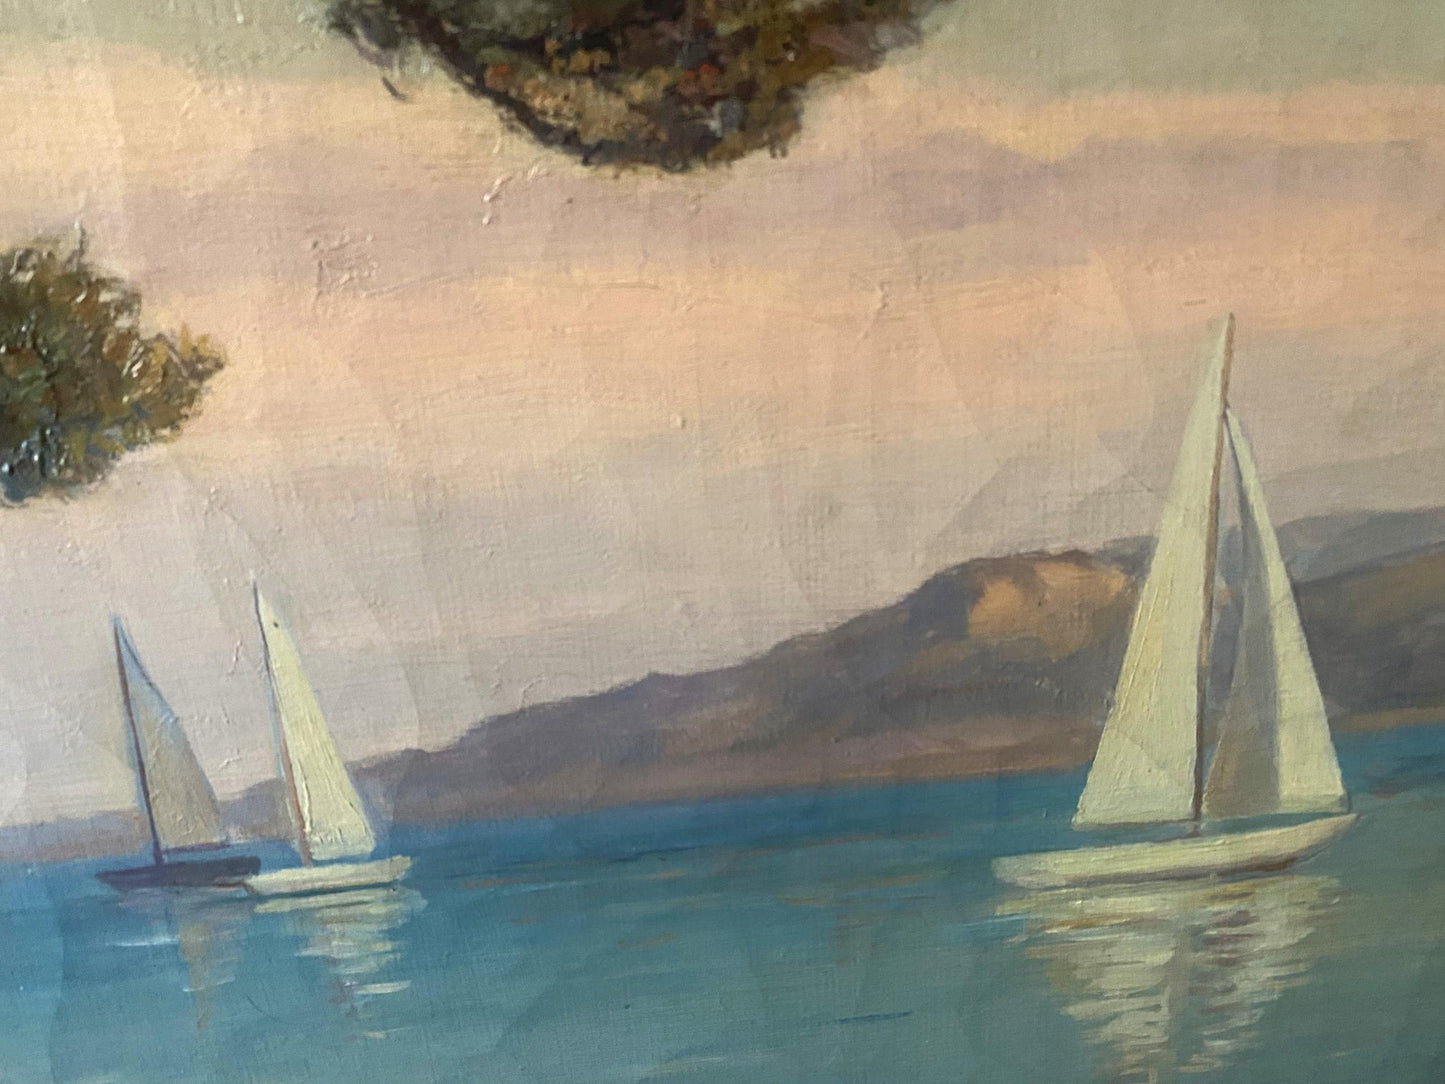 Oil painting Holidays on sailboats Abattucci